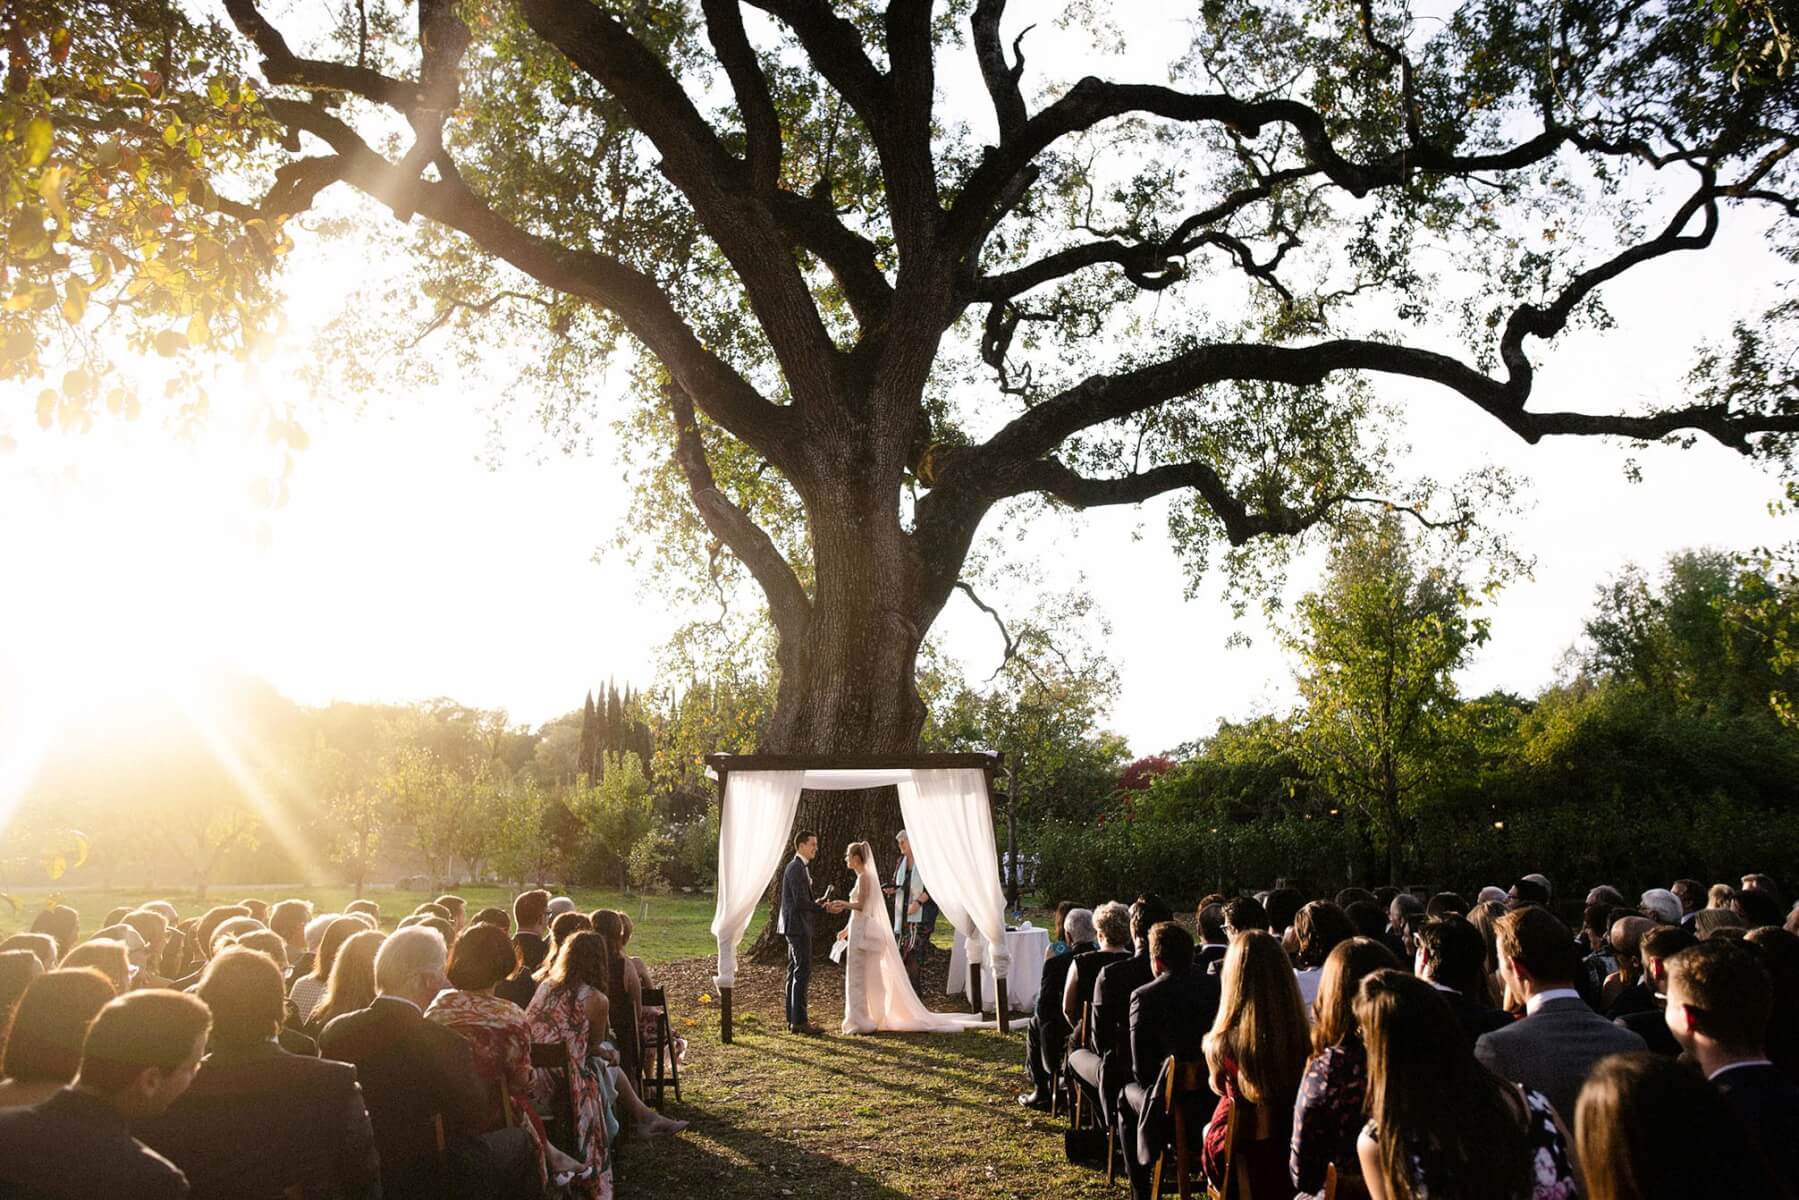 Bride and groom standing under chuppah during wedding ceremony while attendees watch